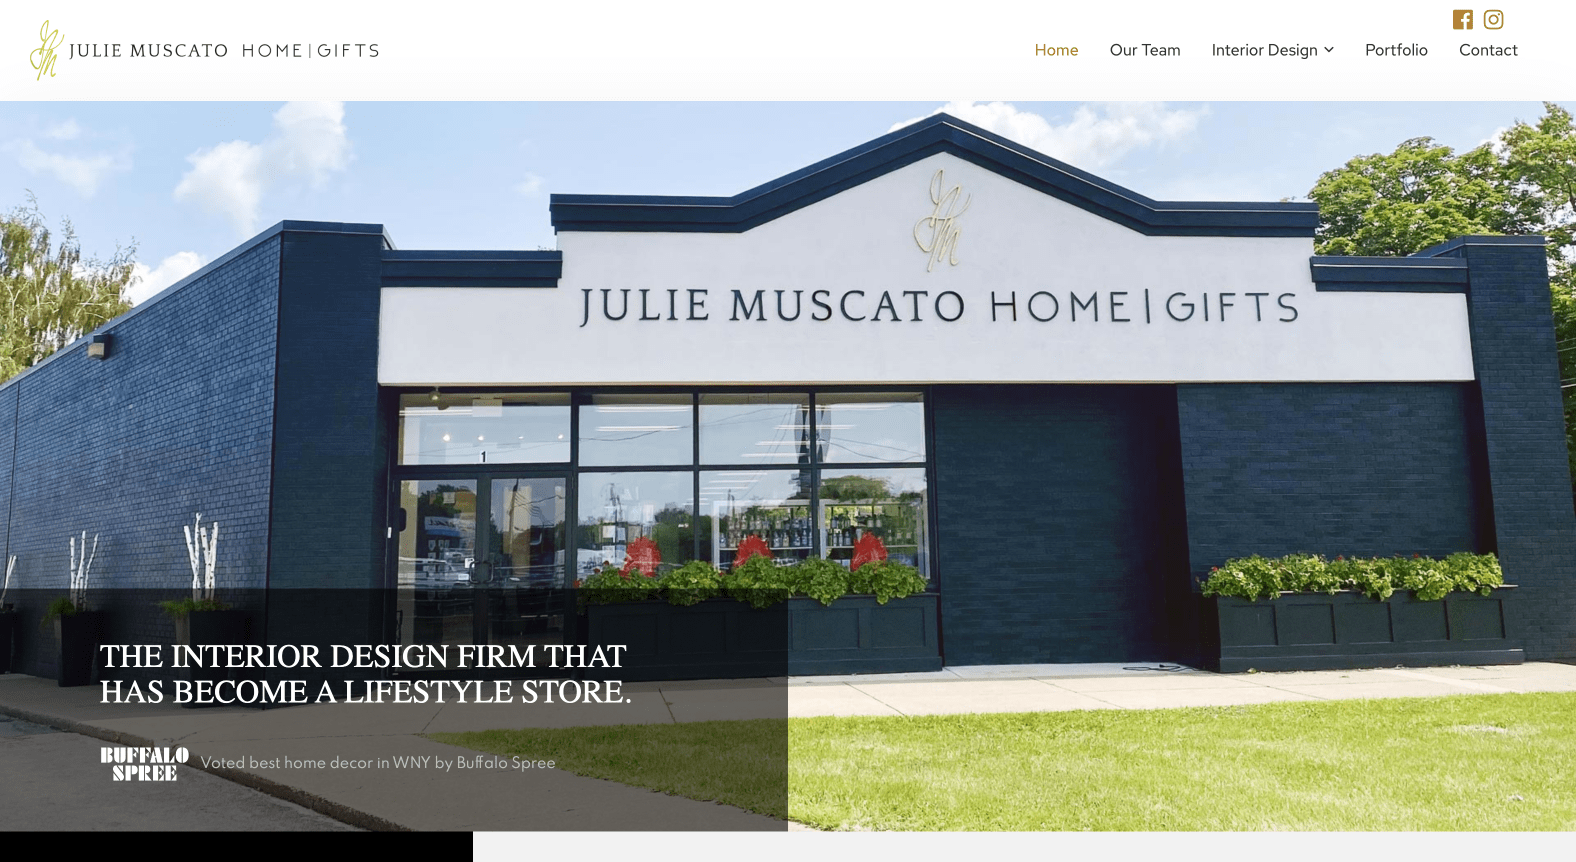 Julie Muscato Home & Gifts